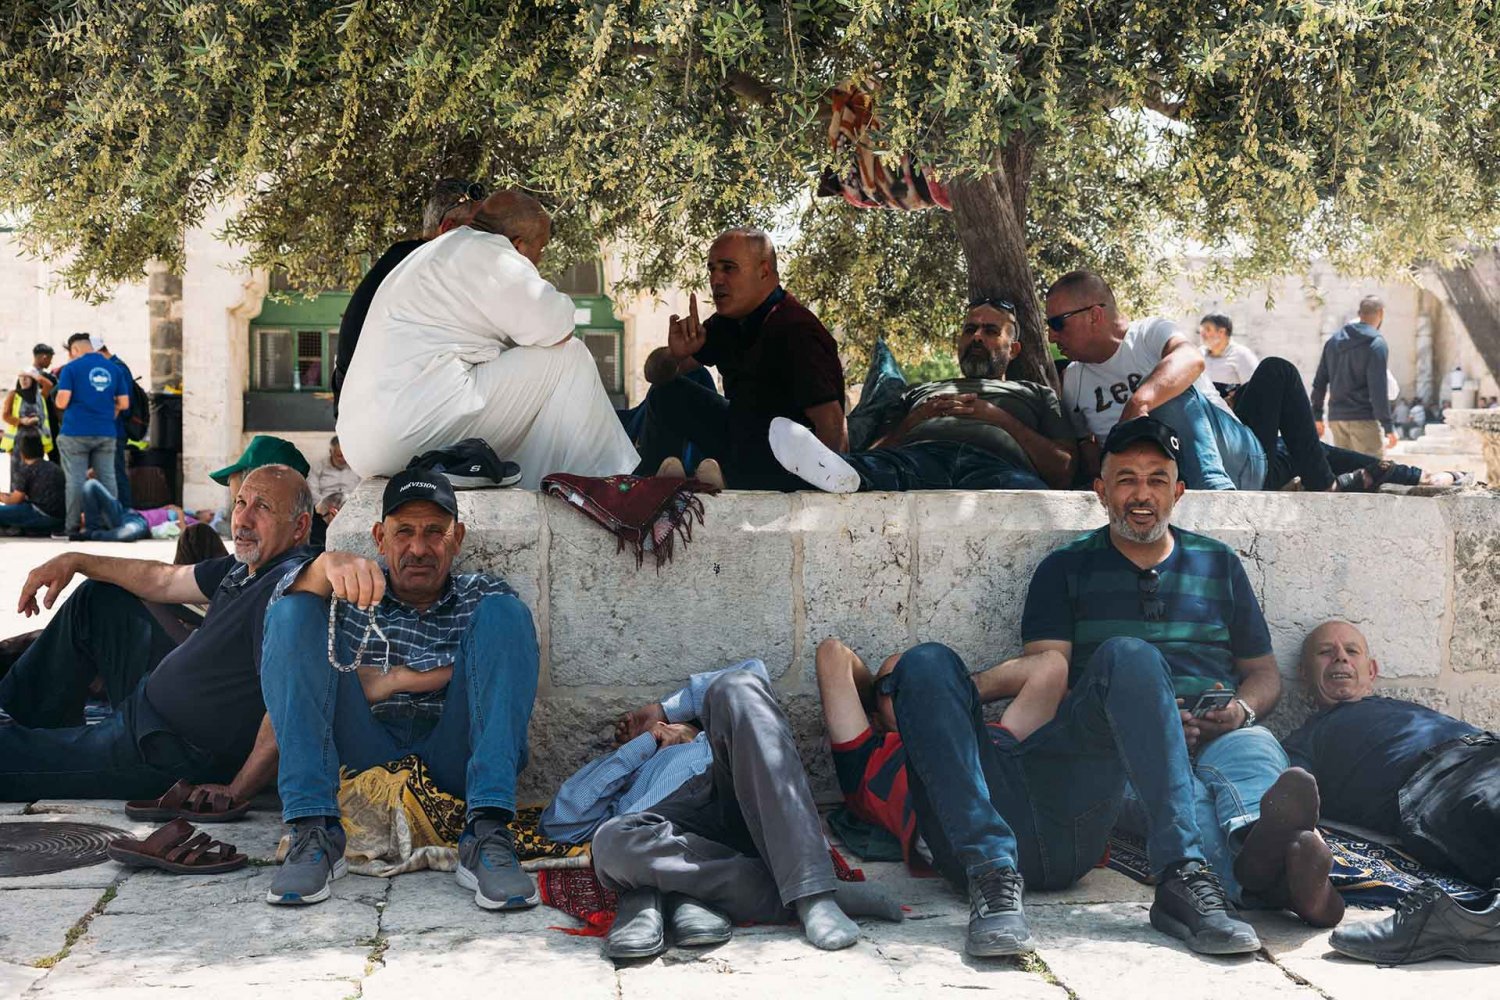 Palestinian men find community under the shade of a tree in the Haram al-Sharif during Ramadan in April 2022.